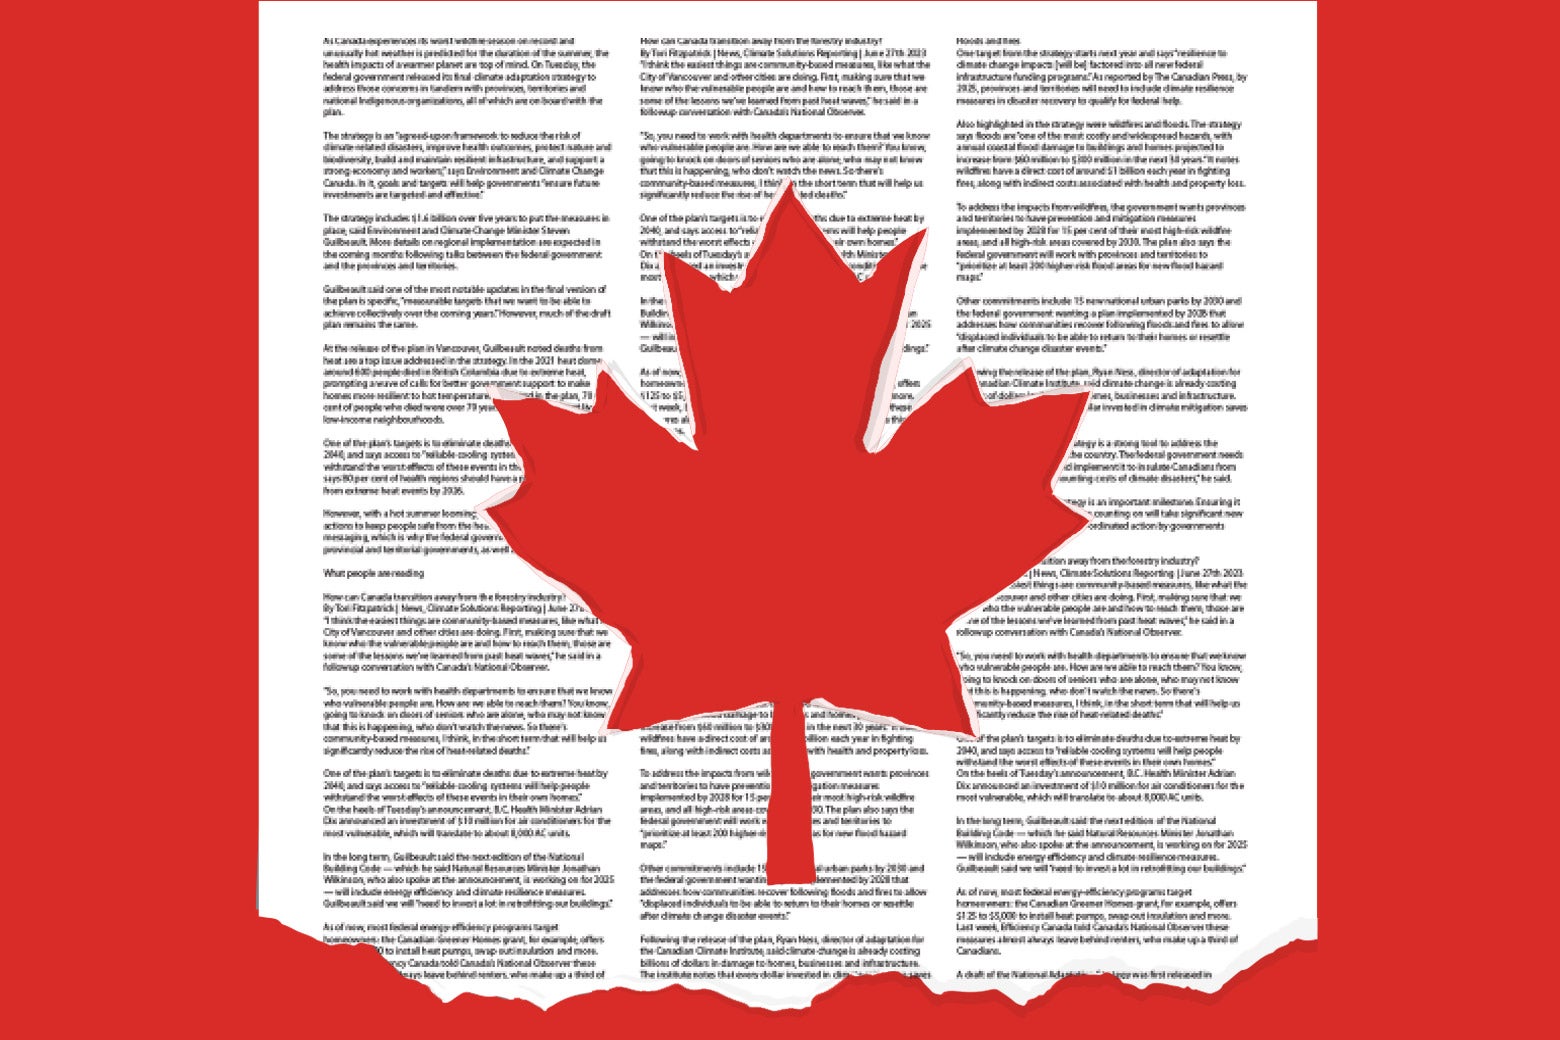 Why Canada’s Attempt to Save Journalism May End Up Crushing It Instead